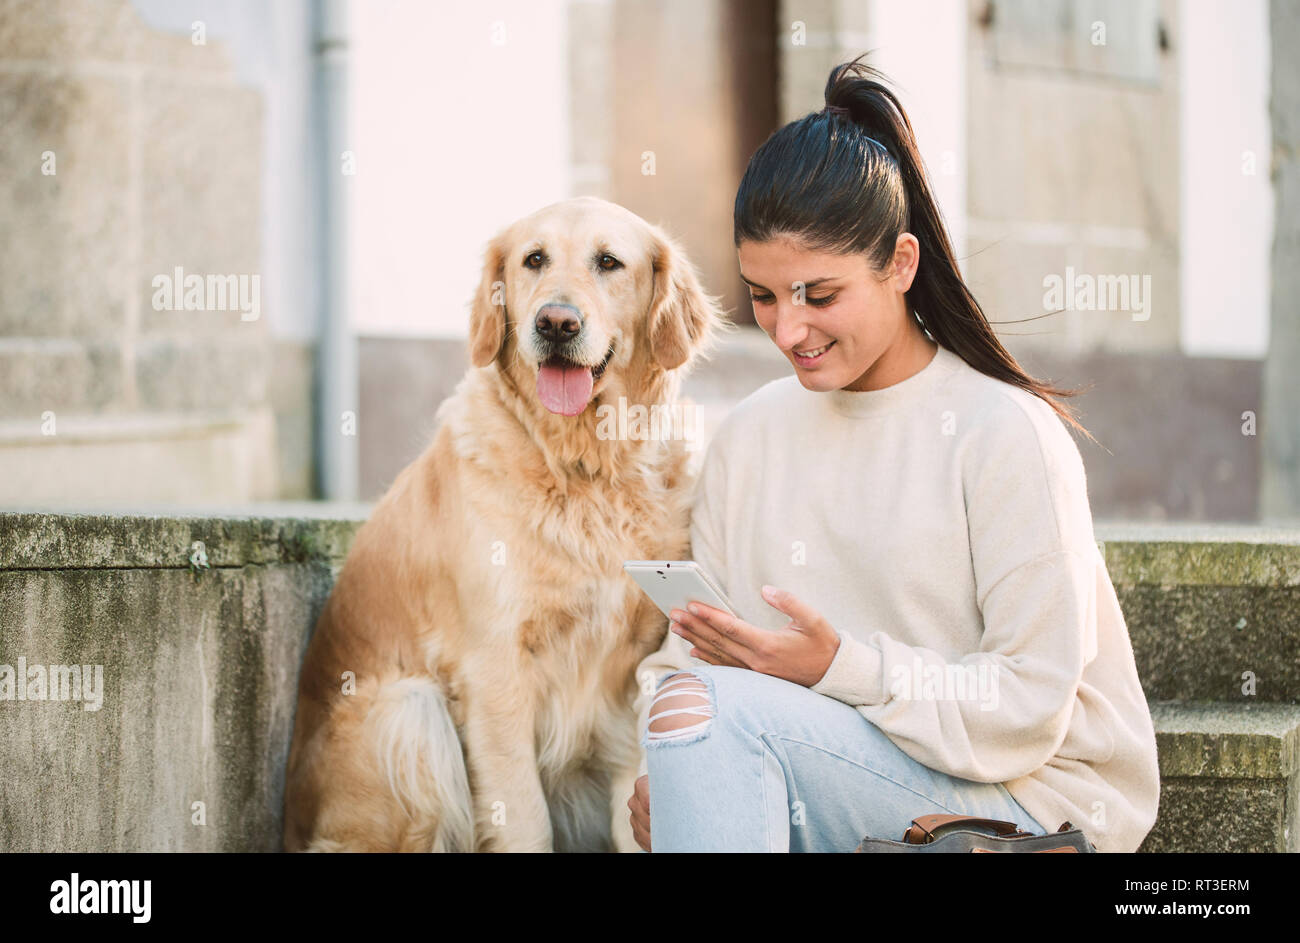 Young woman with her Golden retriever dog on stairs outdoors using cell phone Stock Photo